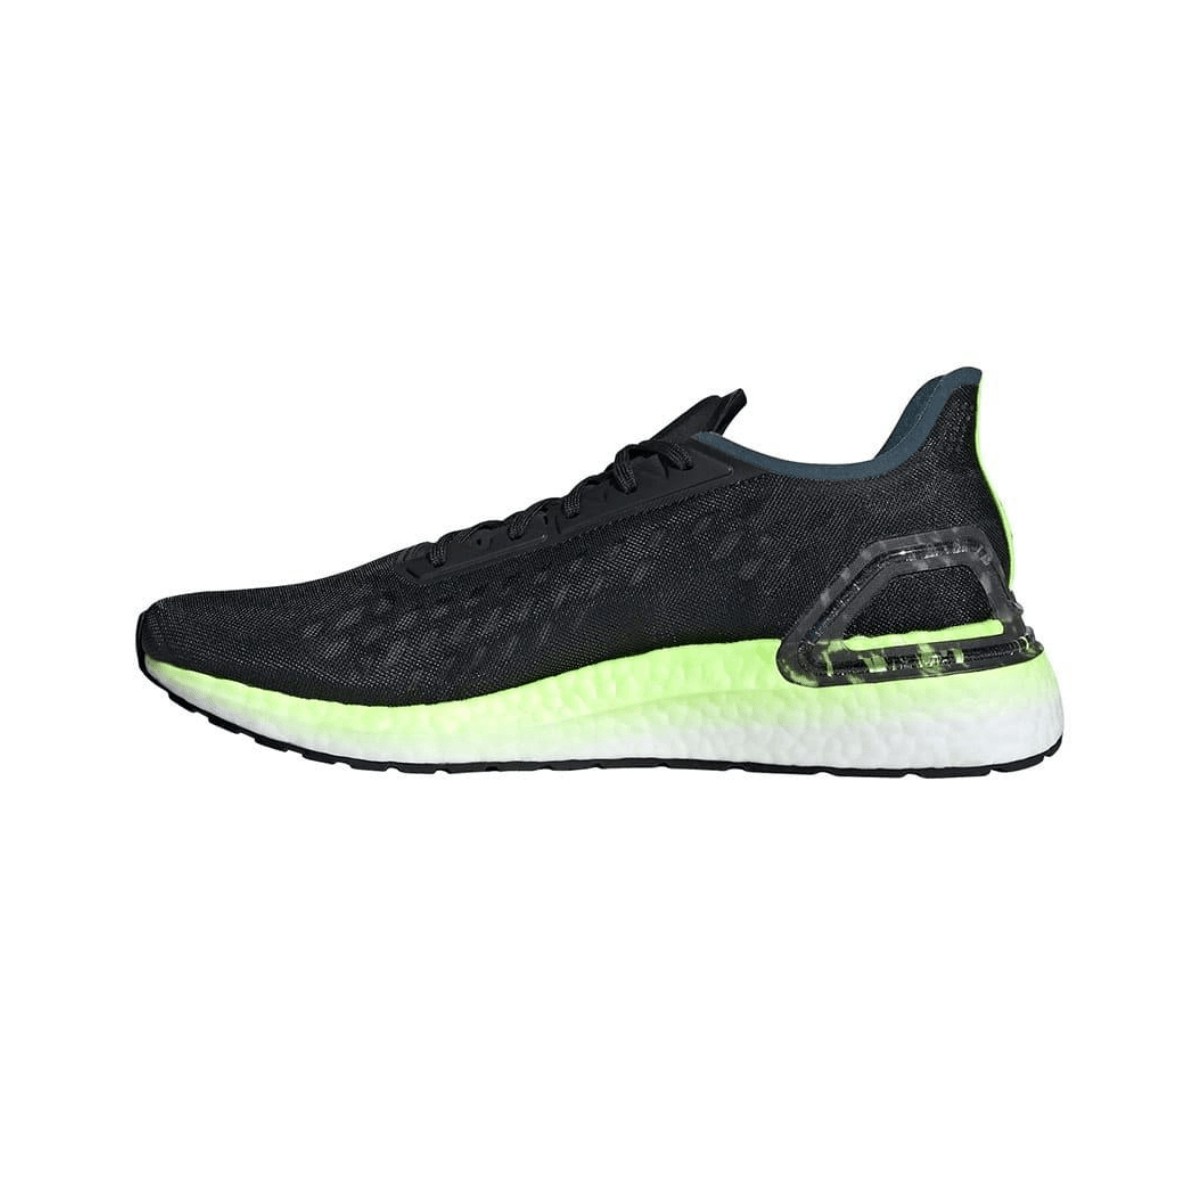 adidas ultra boost mens running shoes